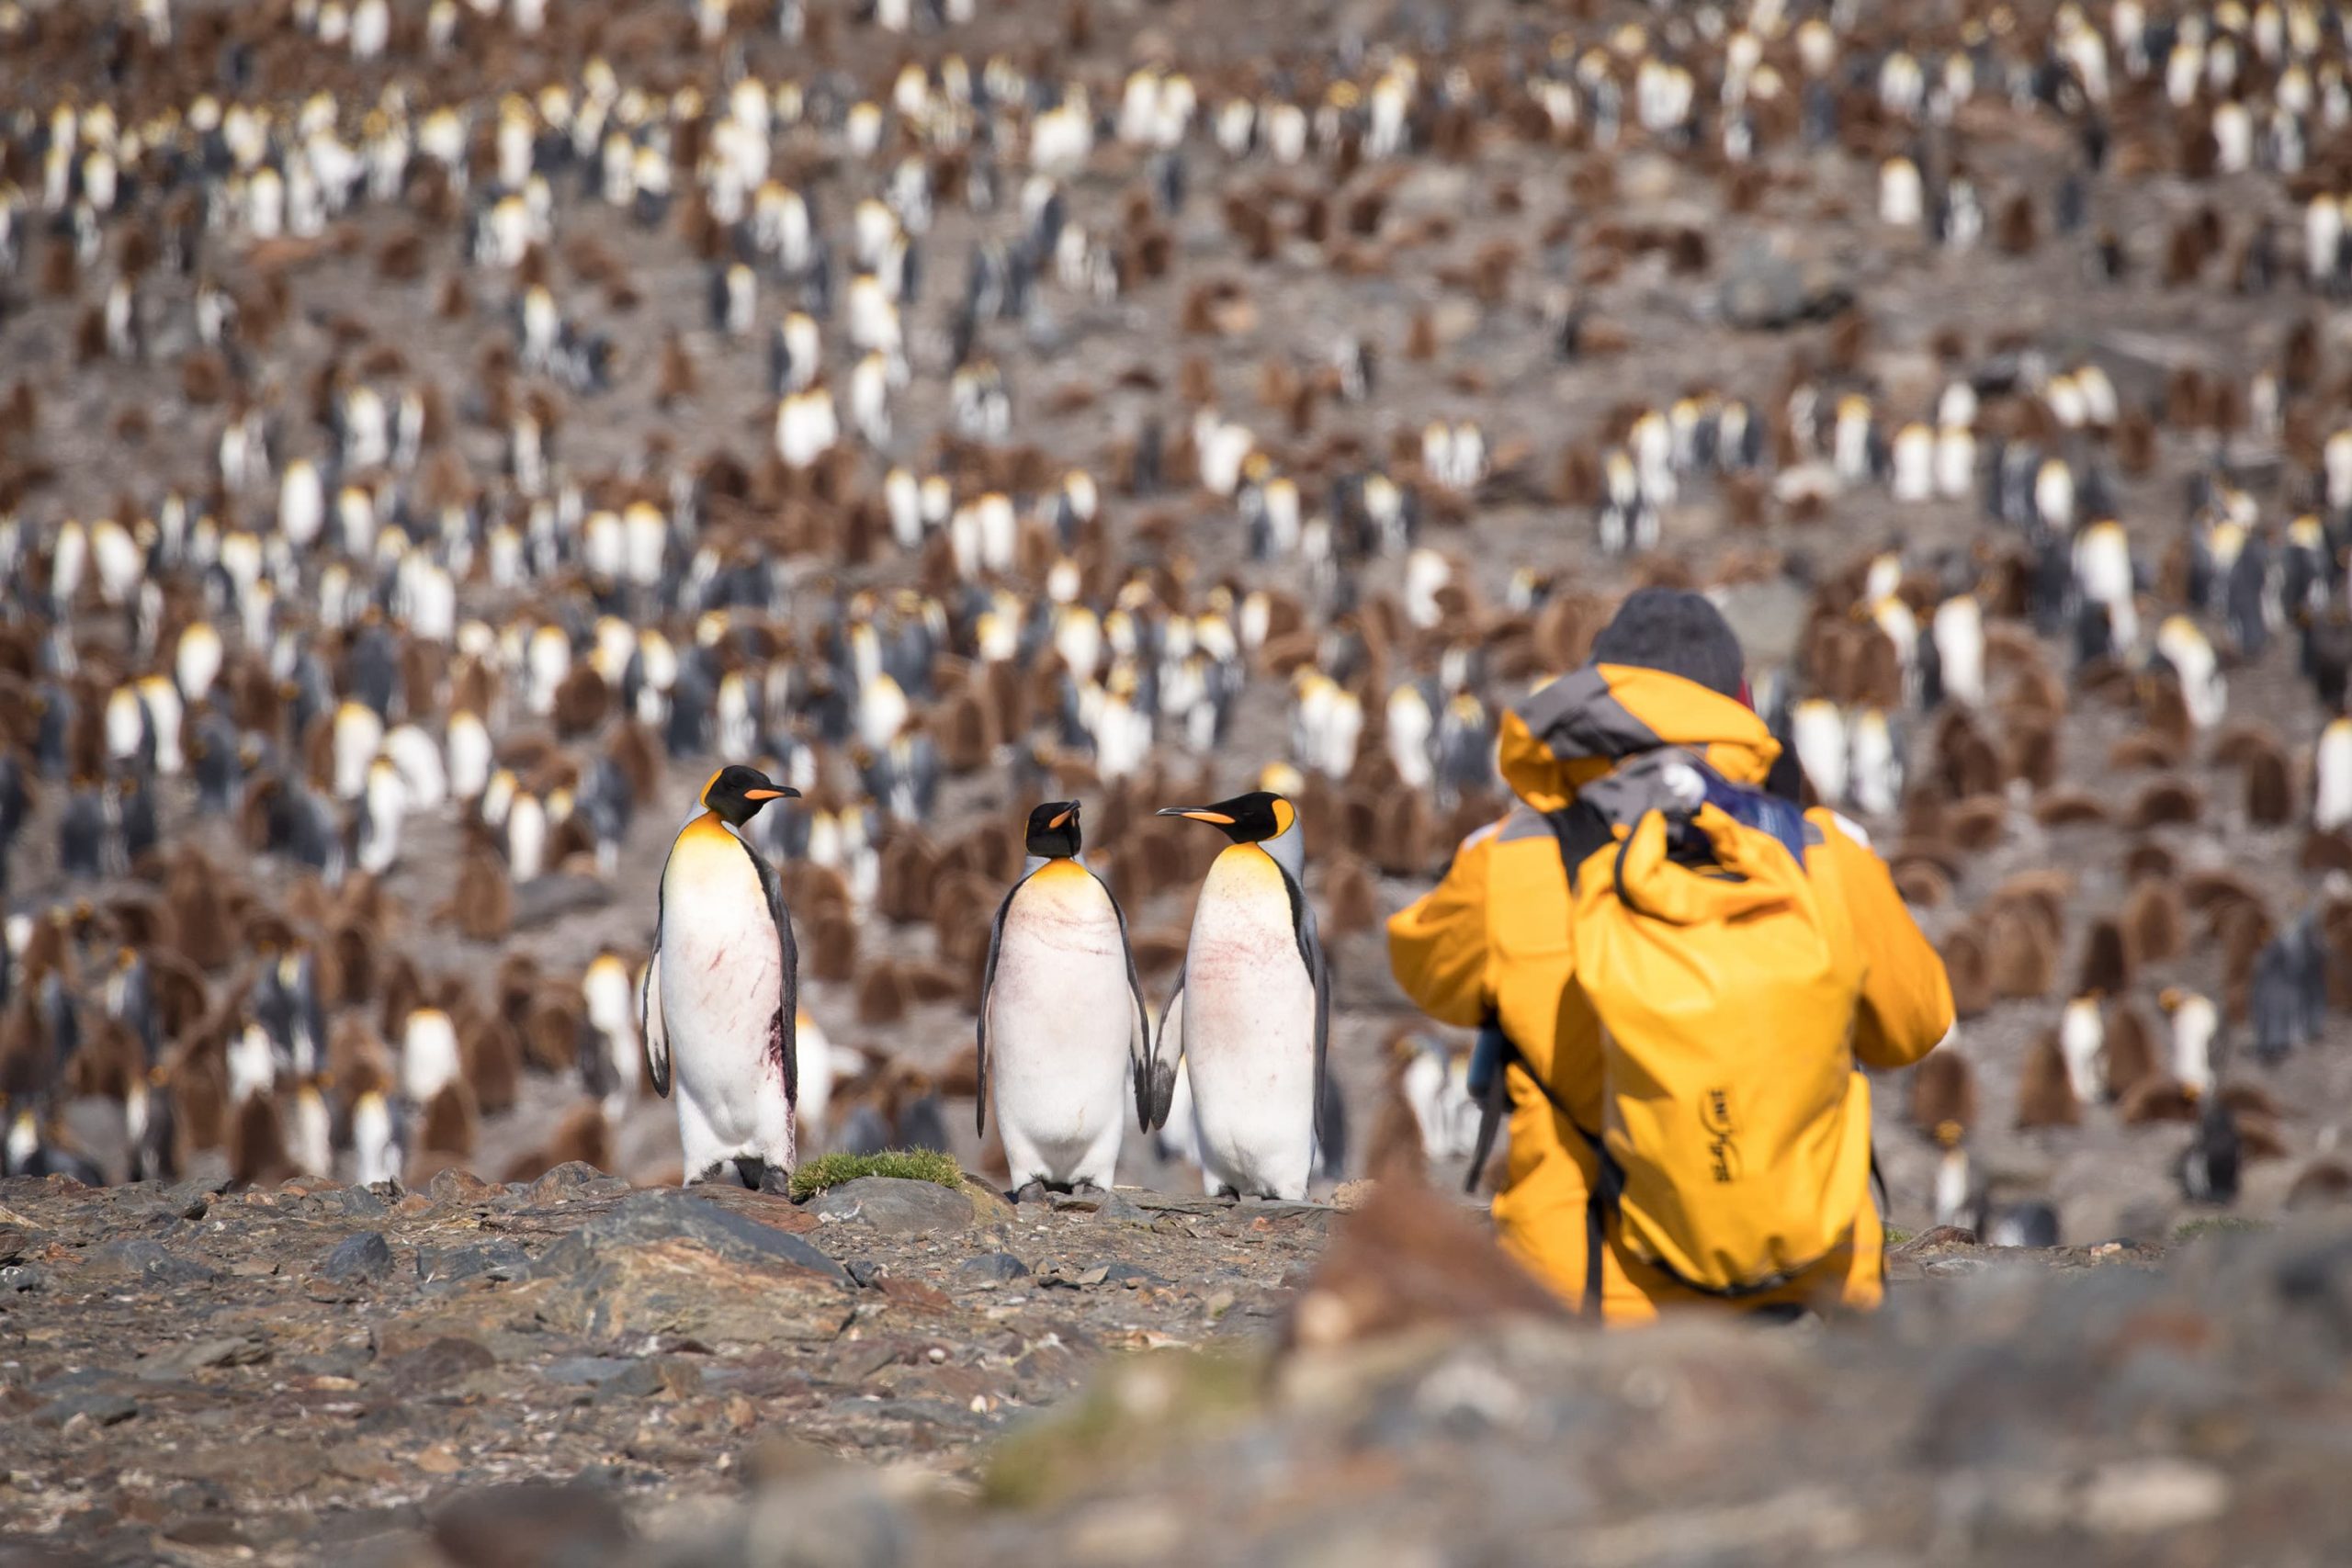 Penguin photographer sits in front of penguins